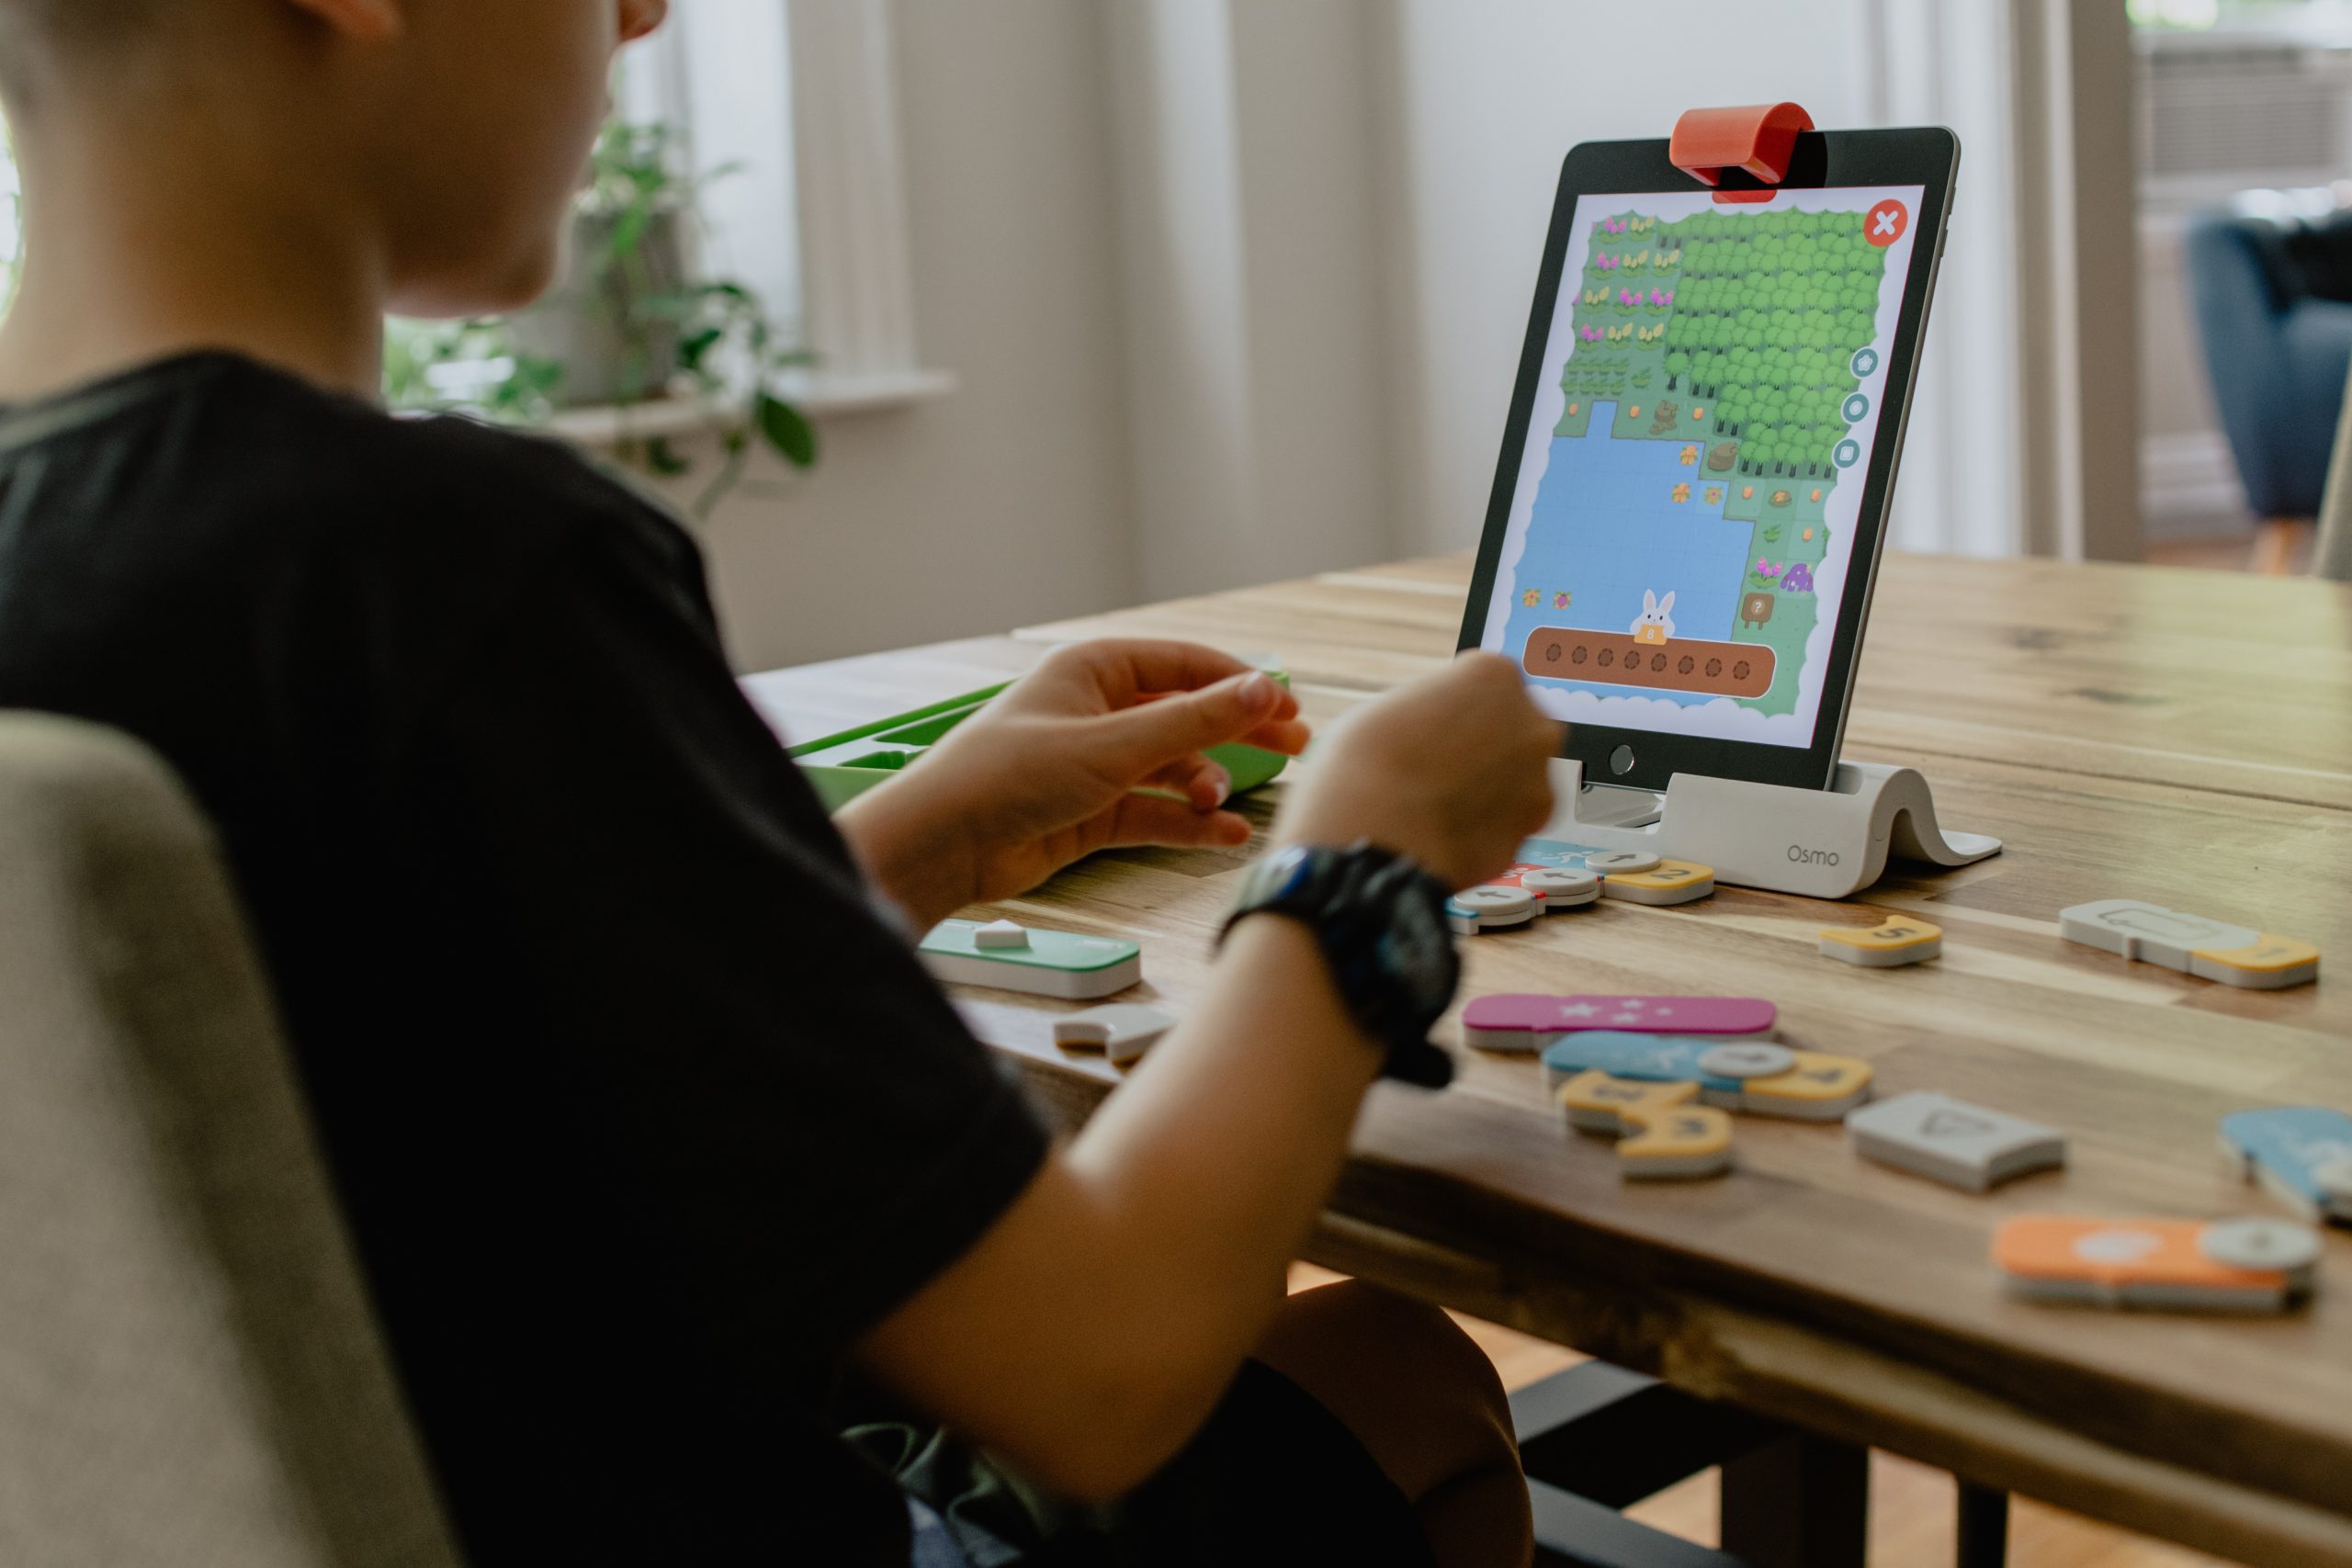 Computer Coding For Kids Made Easy By These 21 Products And Apps - bagged focus roblox